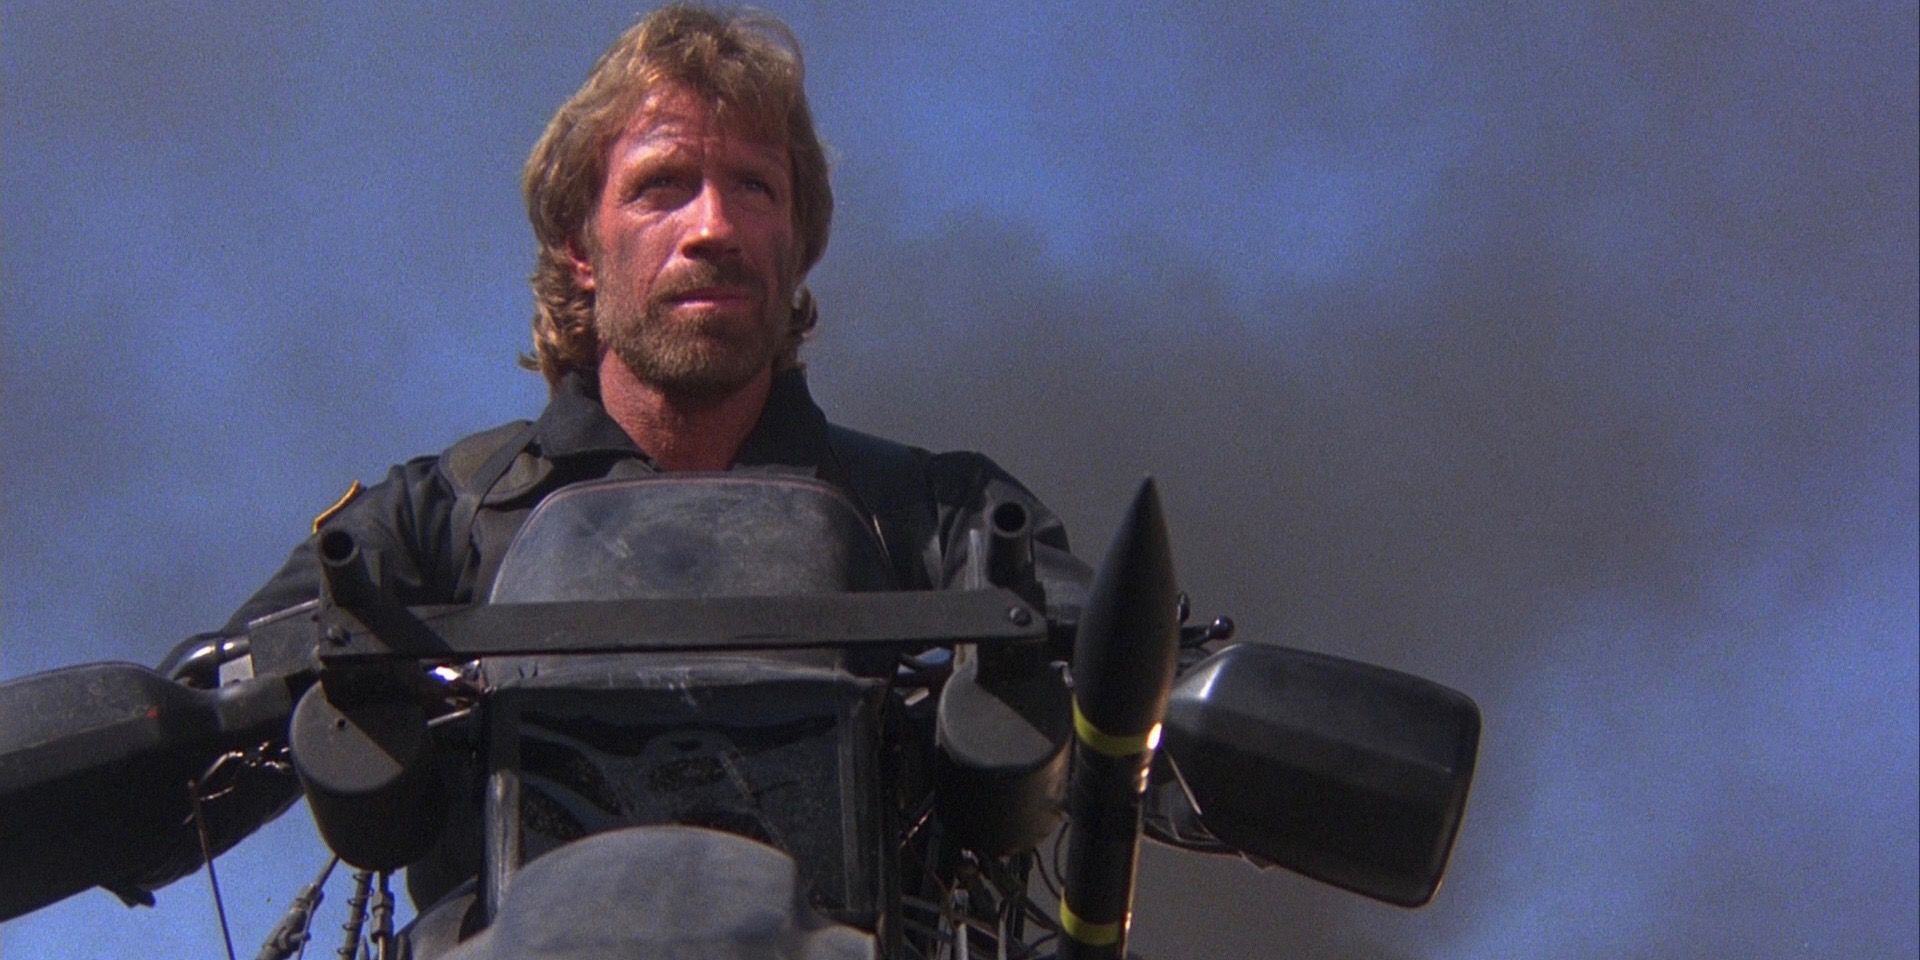 Chuck Norris as seen in Delta Force